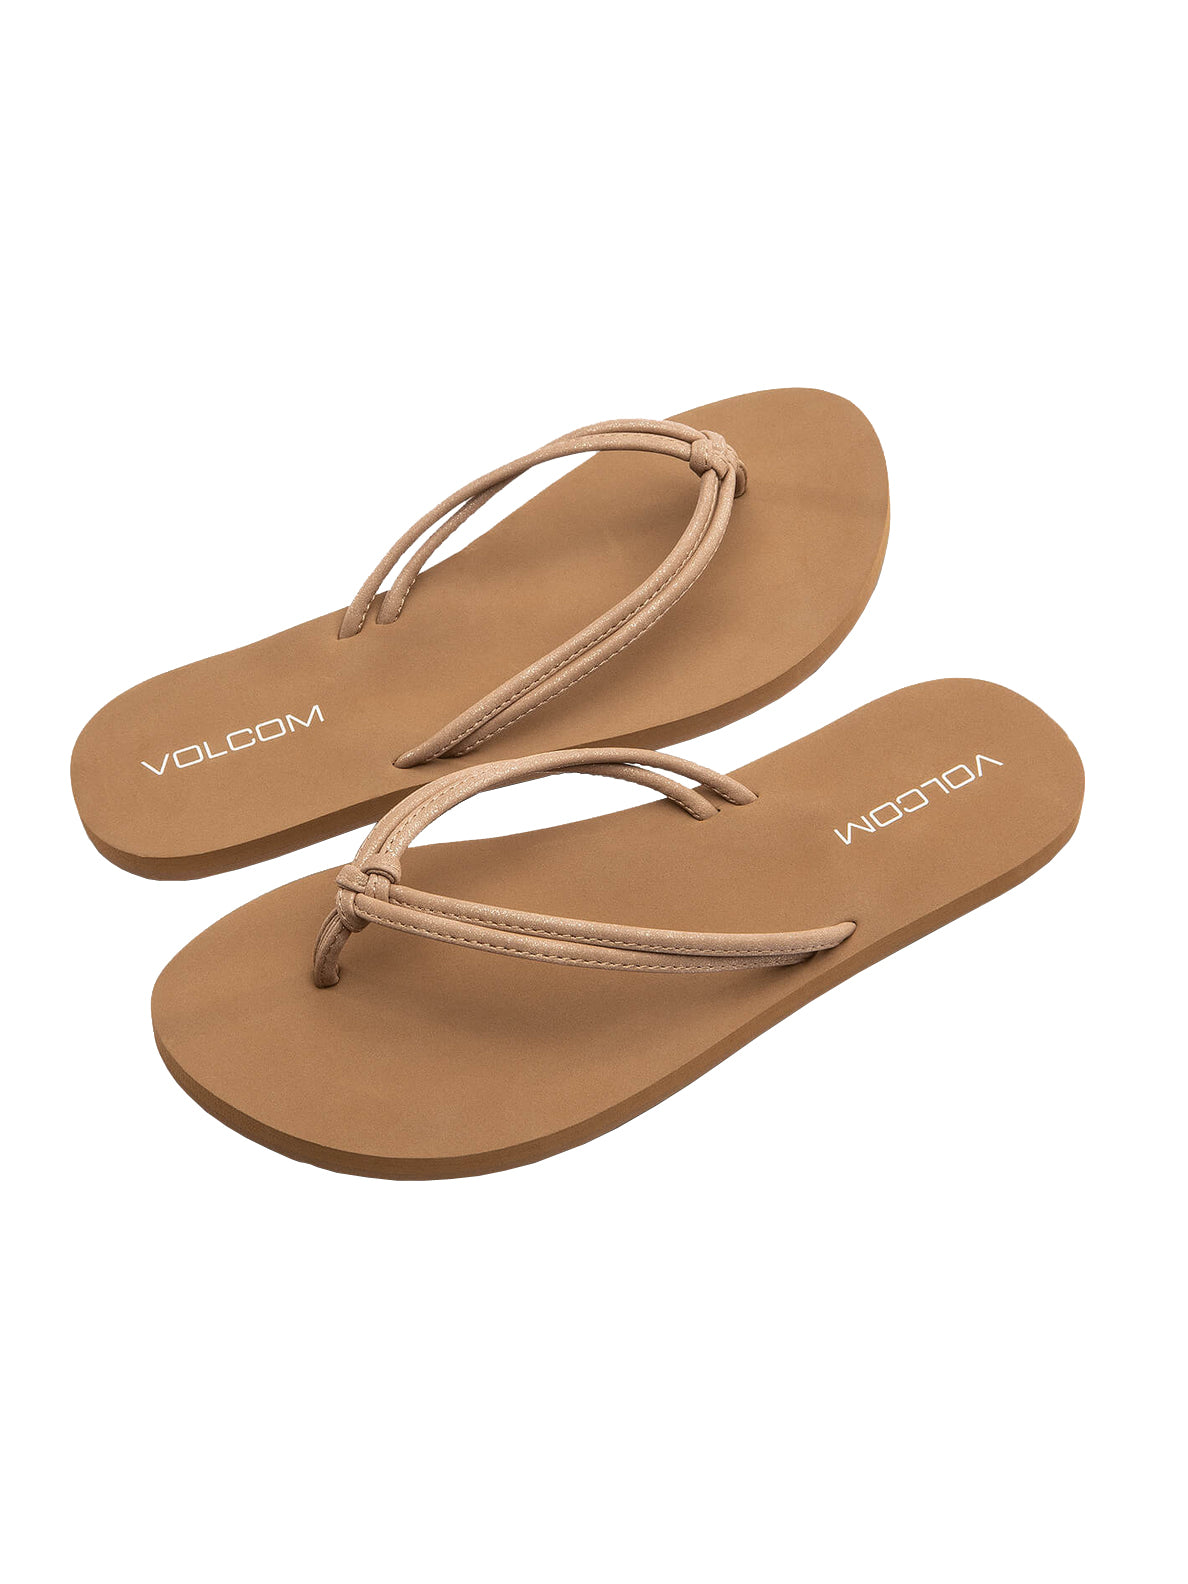 Volcom Forever and Ever 2 Womens Sandal TAN-Tan 9